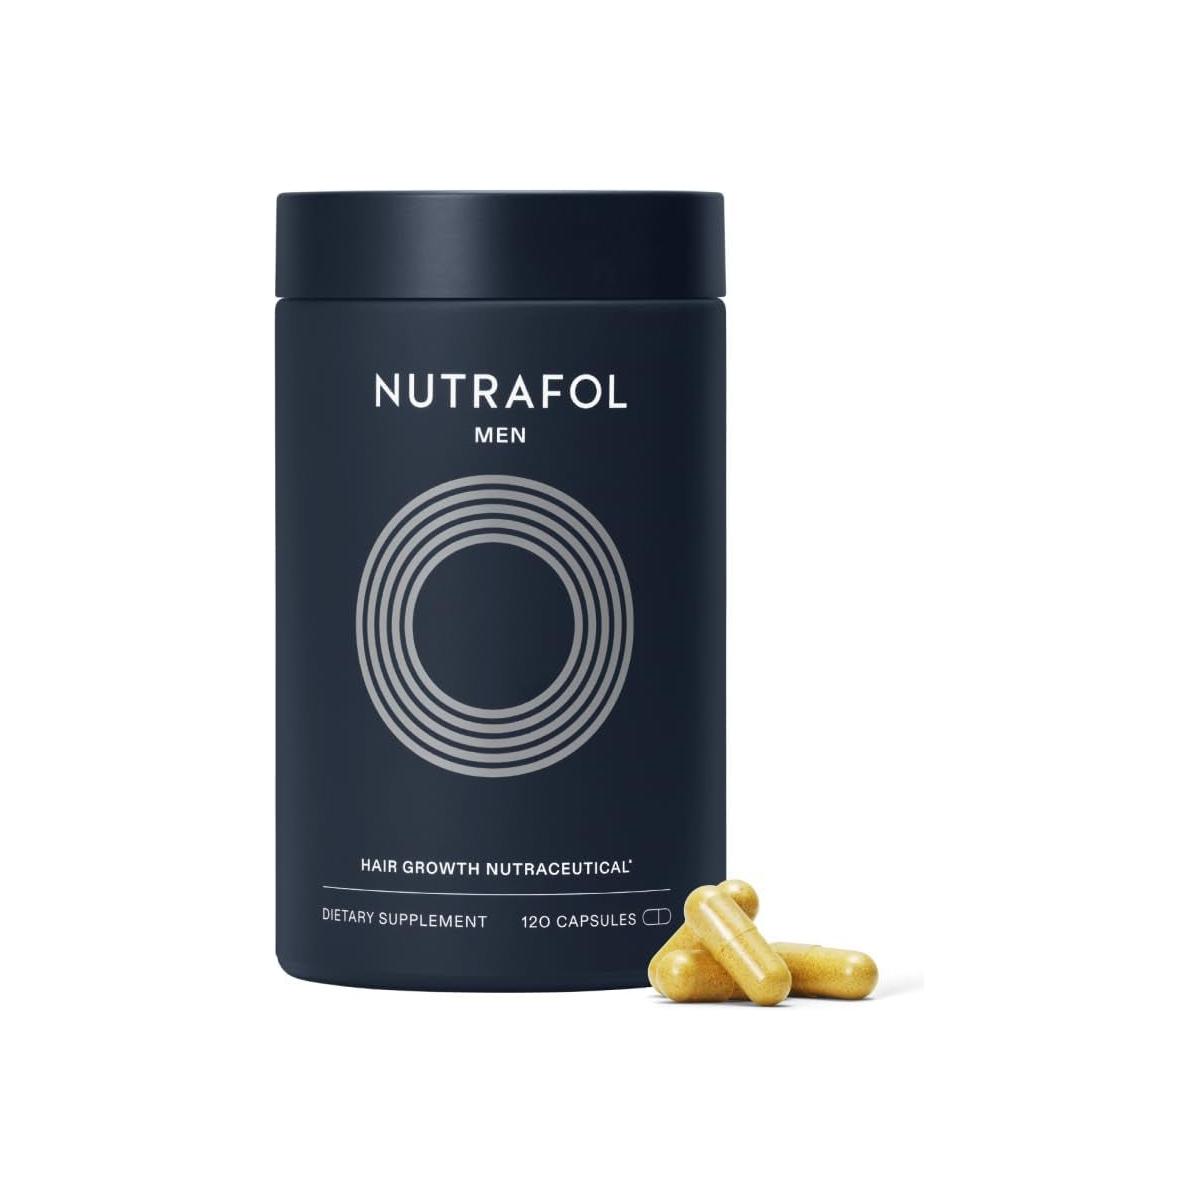 Nutrafol Men Hair Growth Supplements - 1 Month Supply (120 Capsules) - Glam Global UK